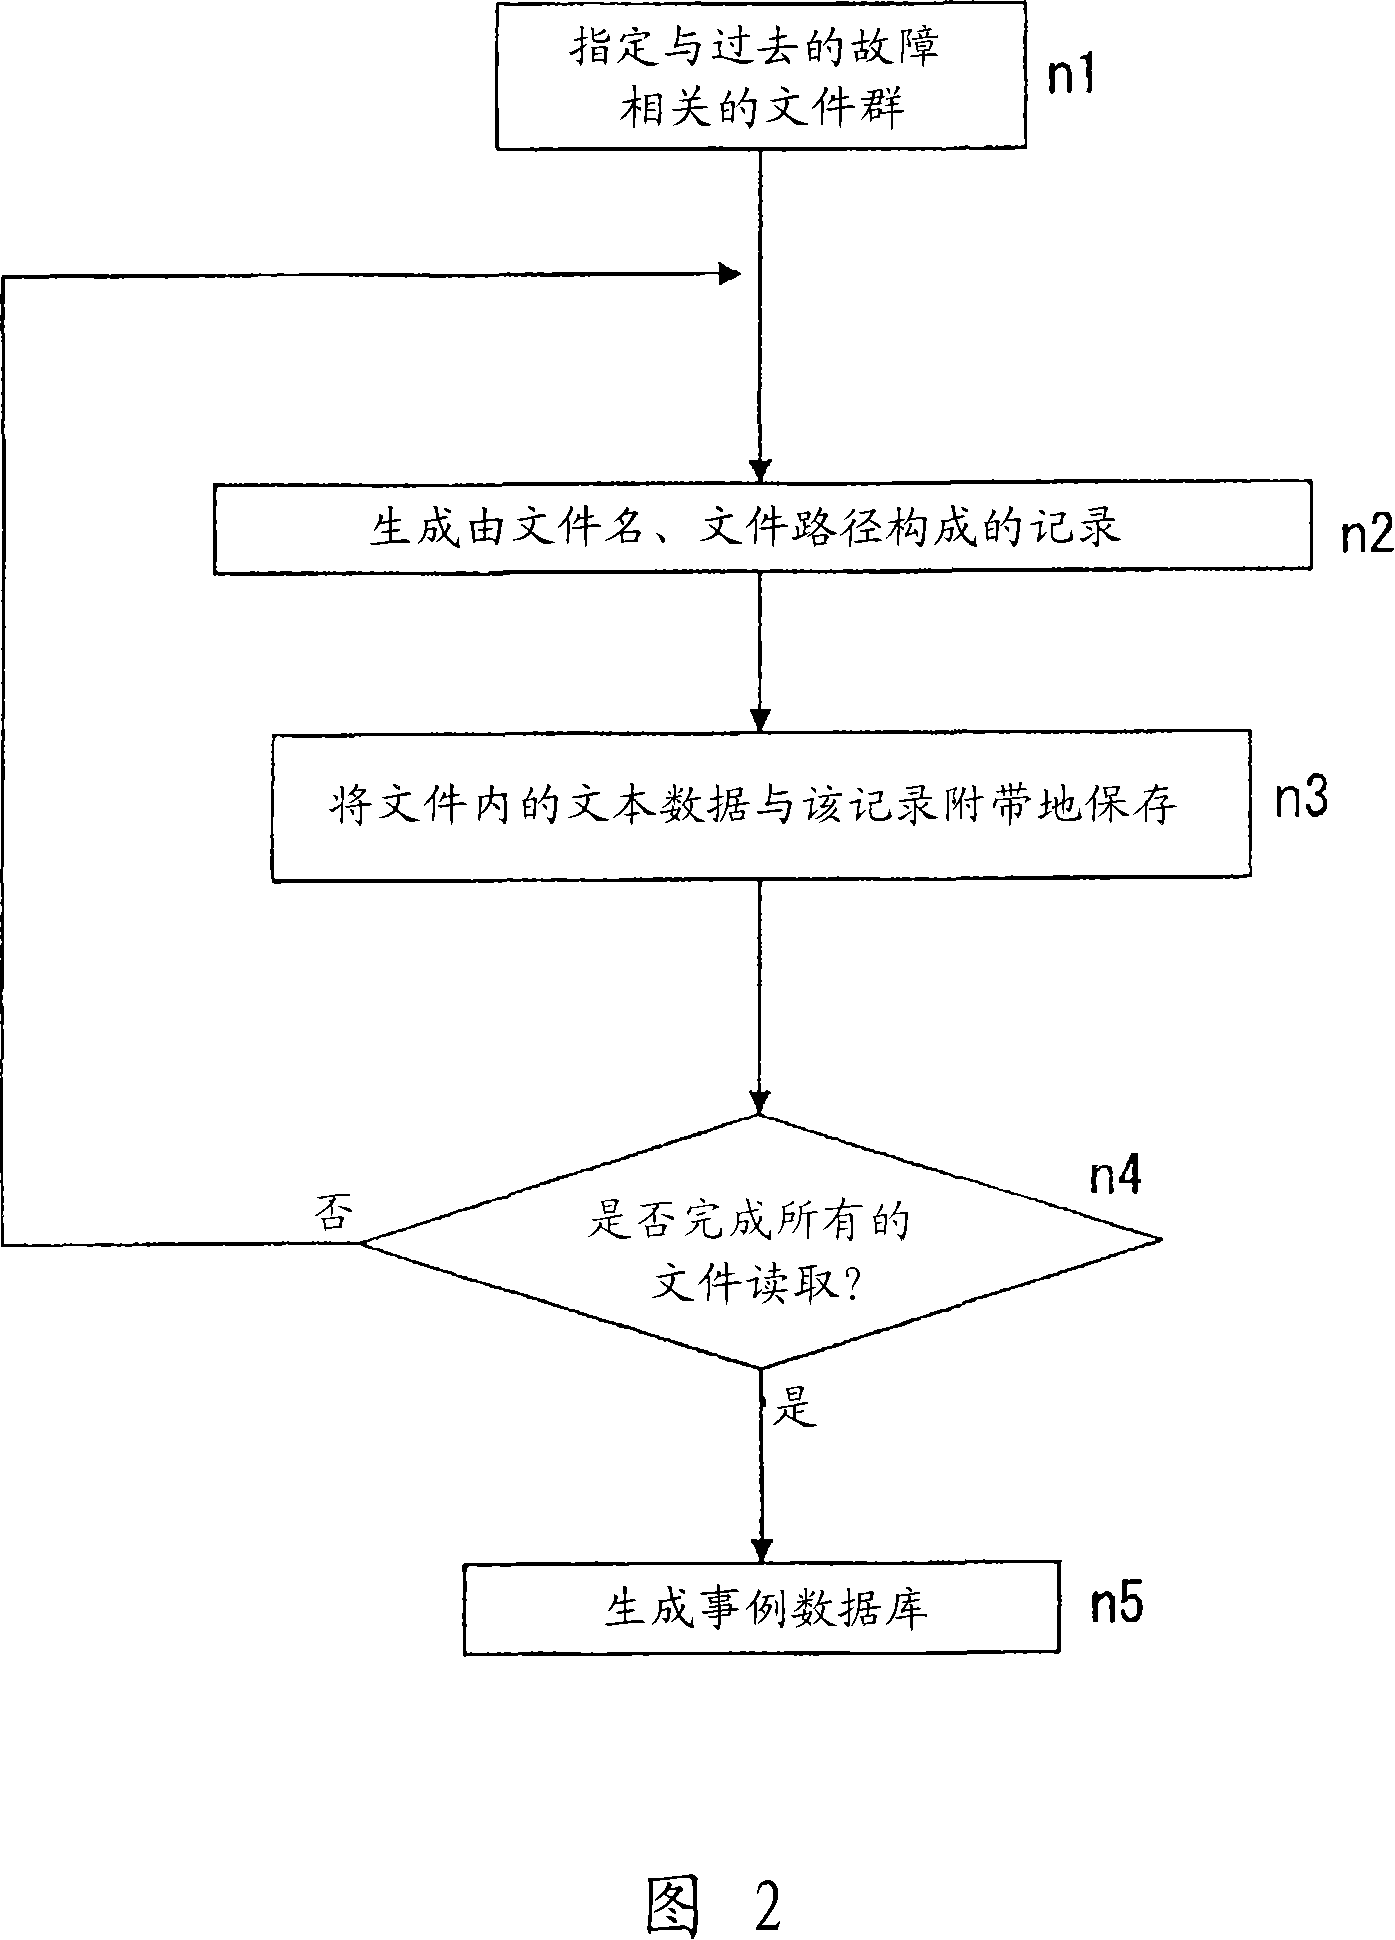 Database generation and use aid apparatus